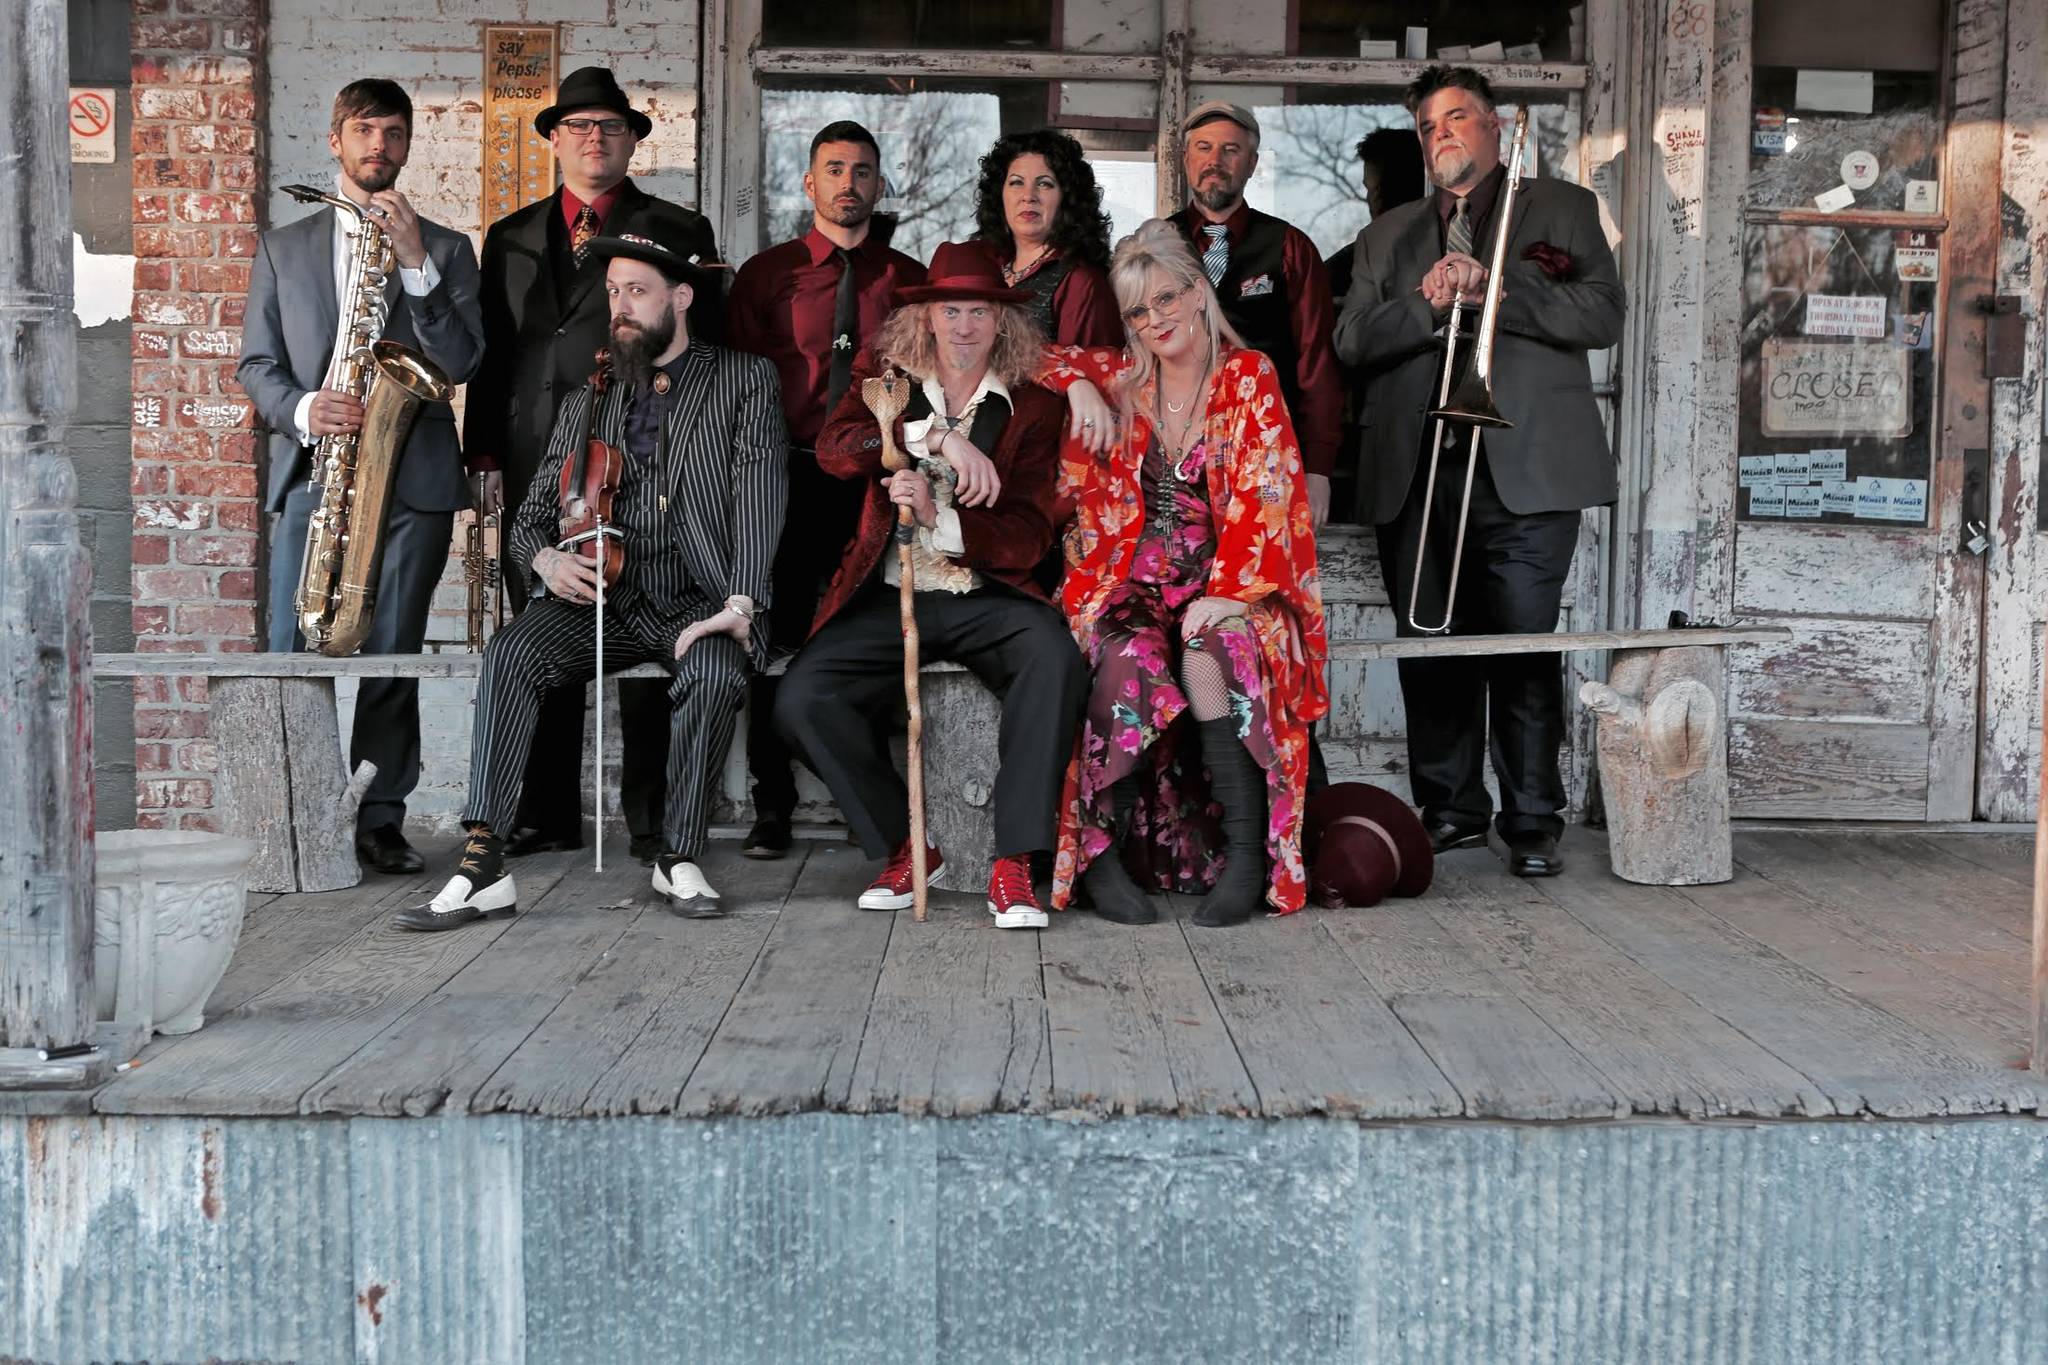 The Squirrel Nut Zippers perform 7:30 p.m. Sunday, Feb. 11, at the Homer Mariner Theatre. (Photo provided)